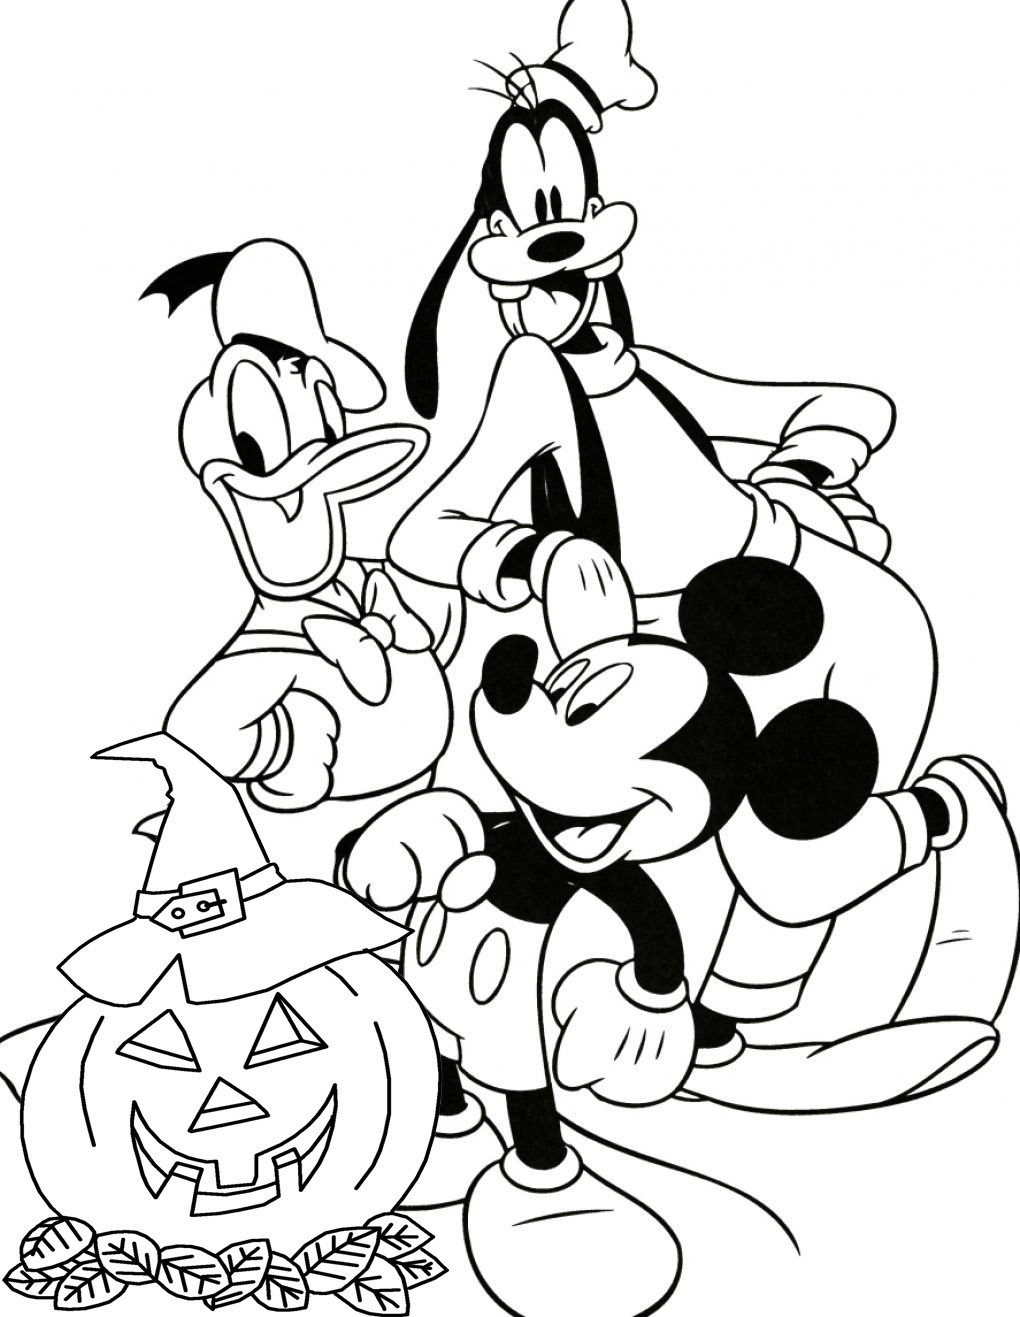 Coloring Pages For Halloween Printable
 Free Disney Halloween Coloring Pages Lovebugs and Postcards